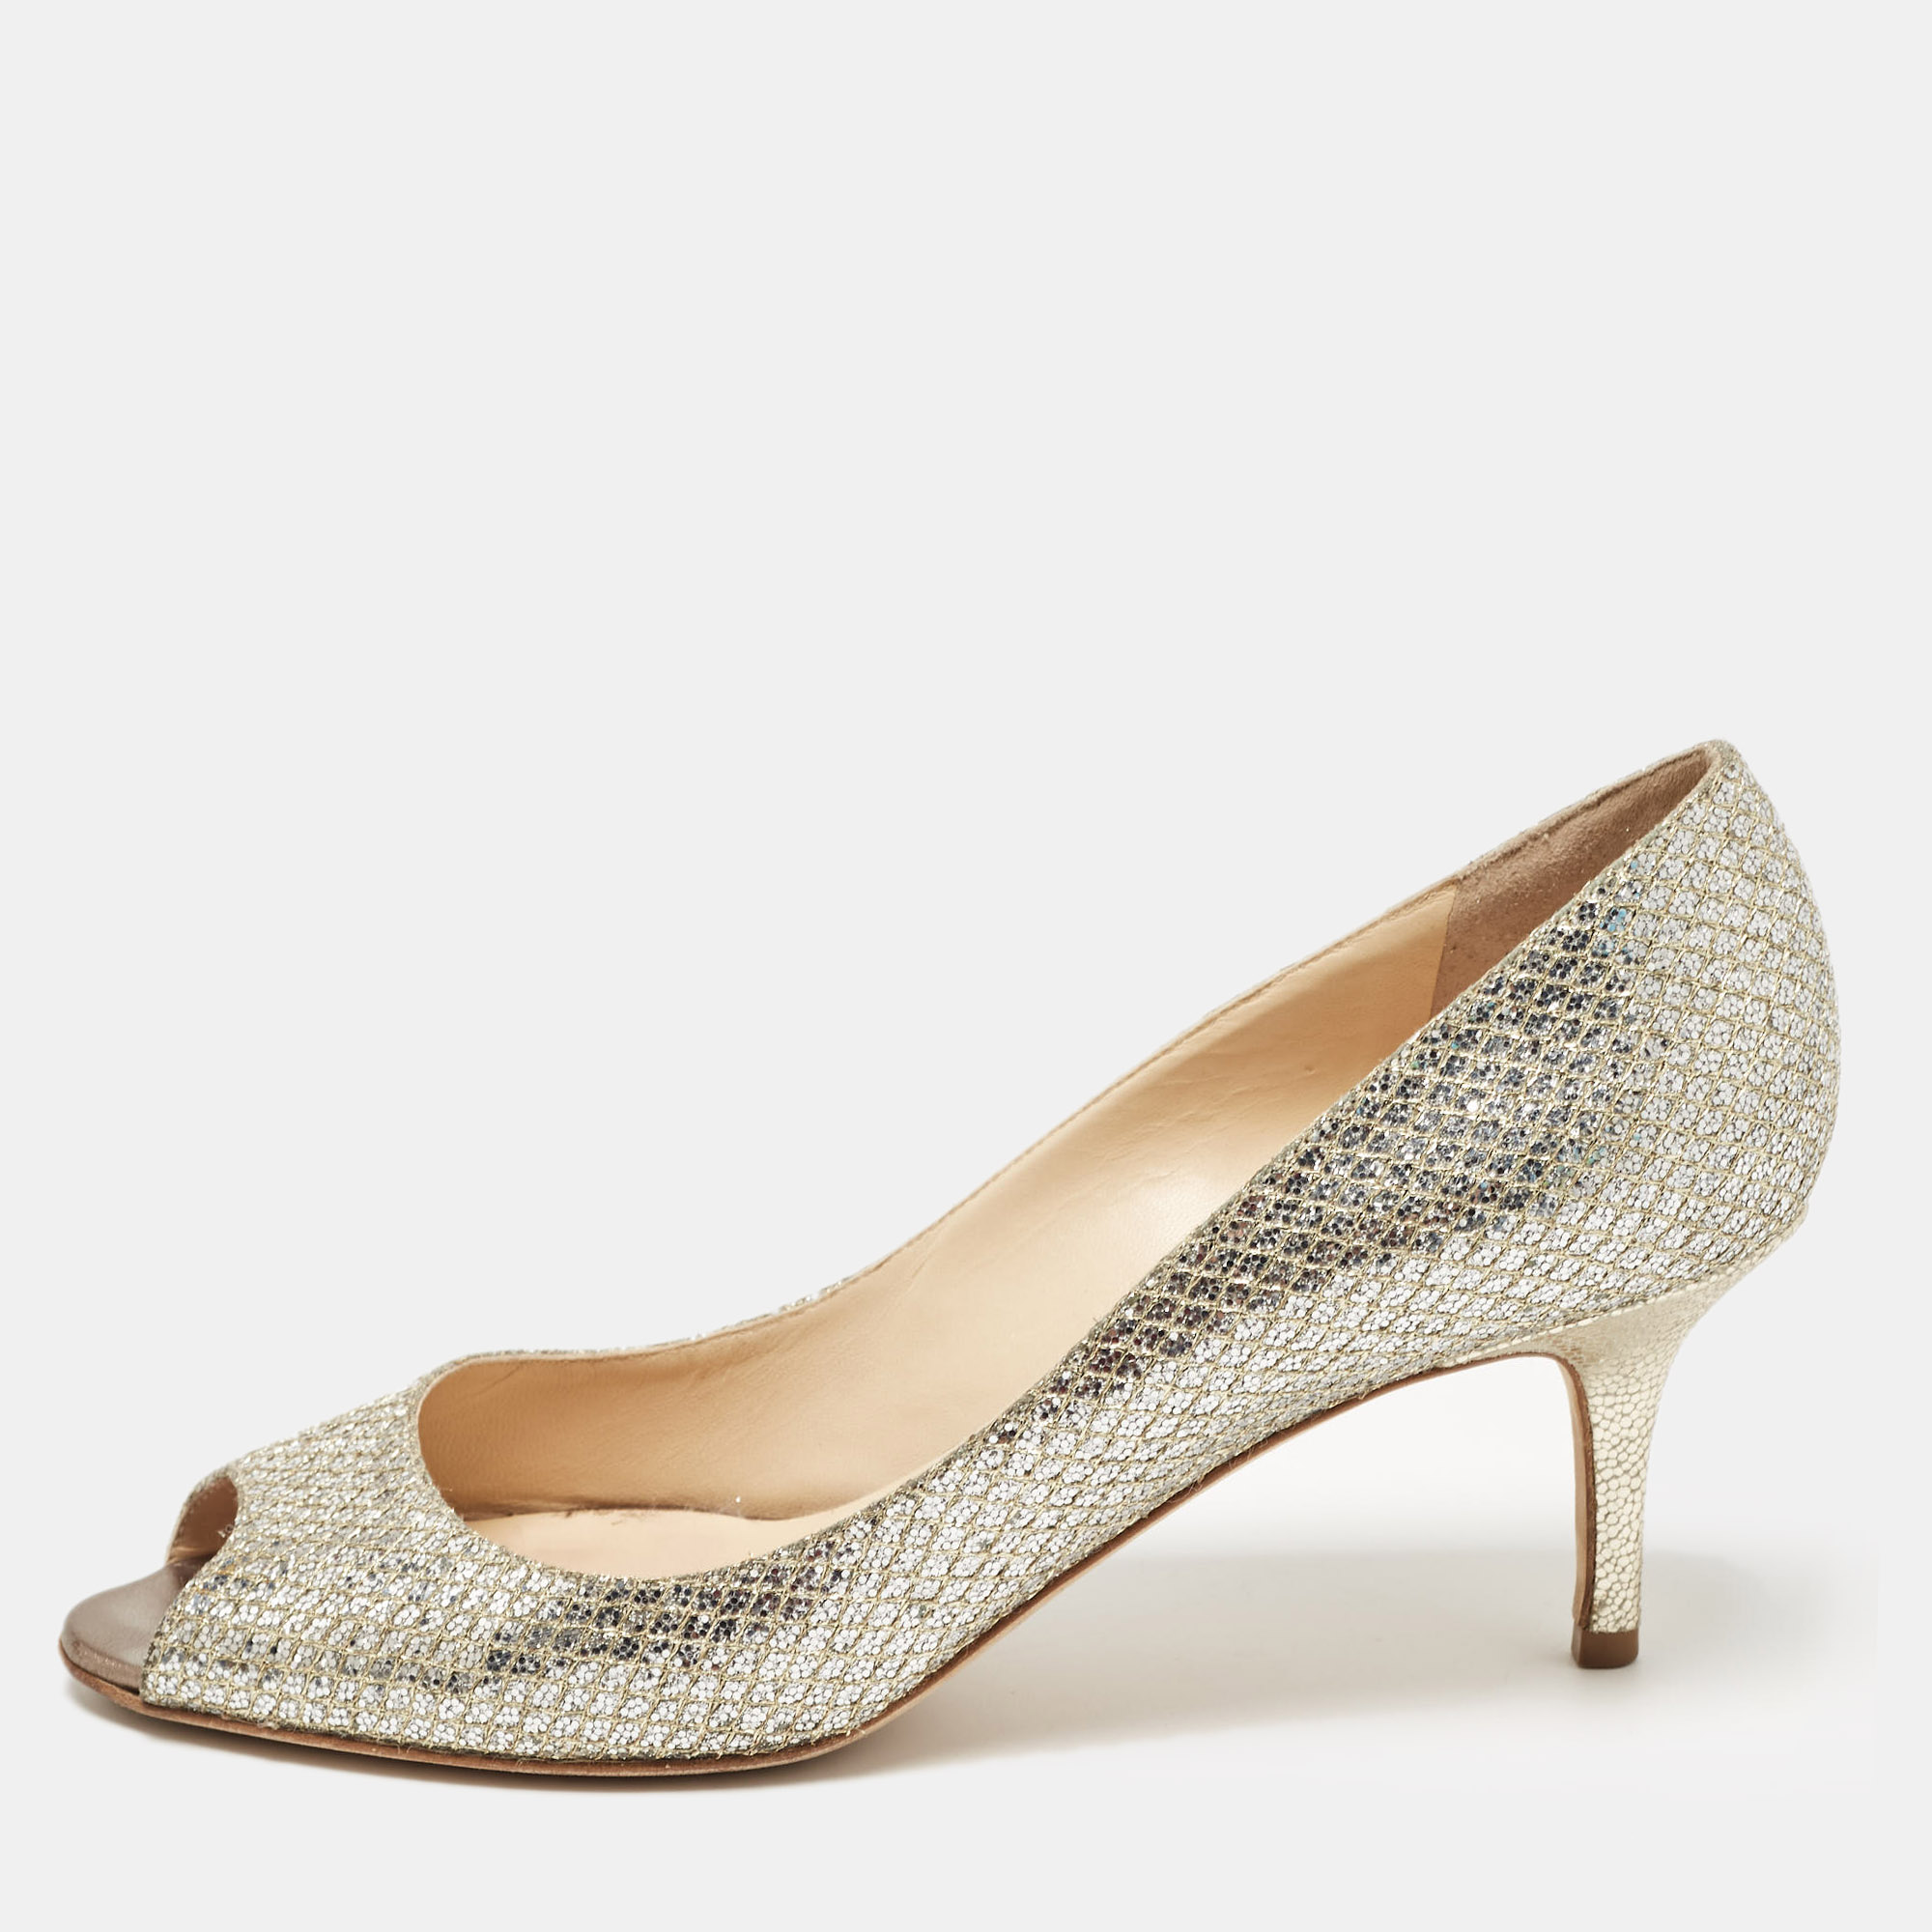 Jimmy choo gold/silver glitter and leather isabel peep toe pumps size 38.5